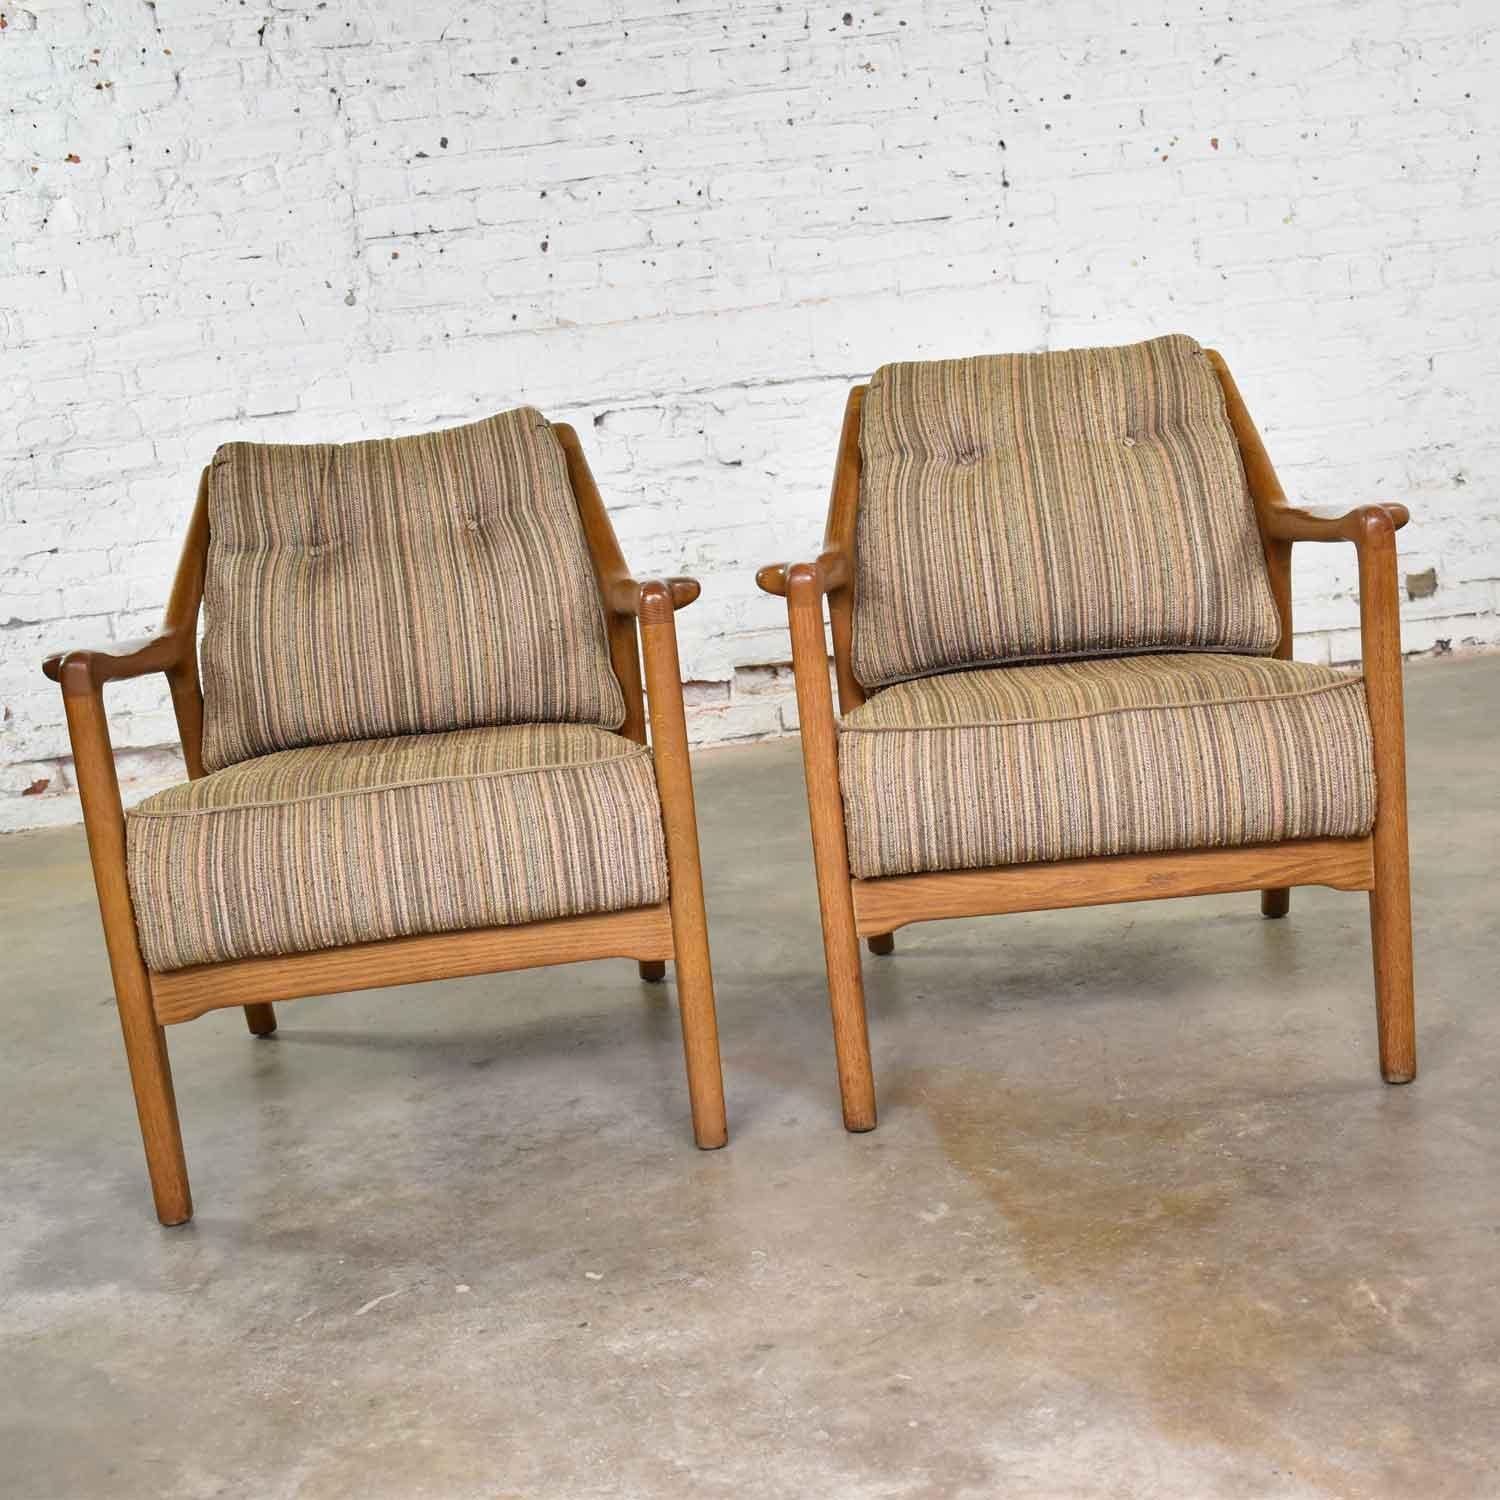 American Pair of Ash Group Spindle Back Chairs by Jack Van der Molen for Jamestown Lounge